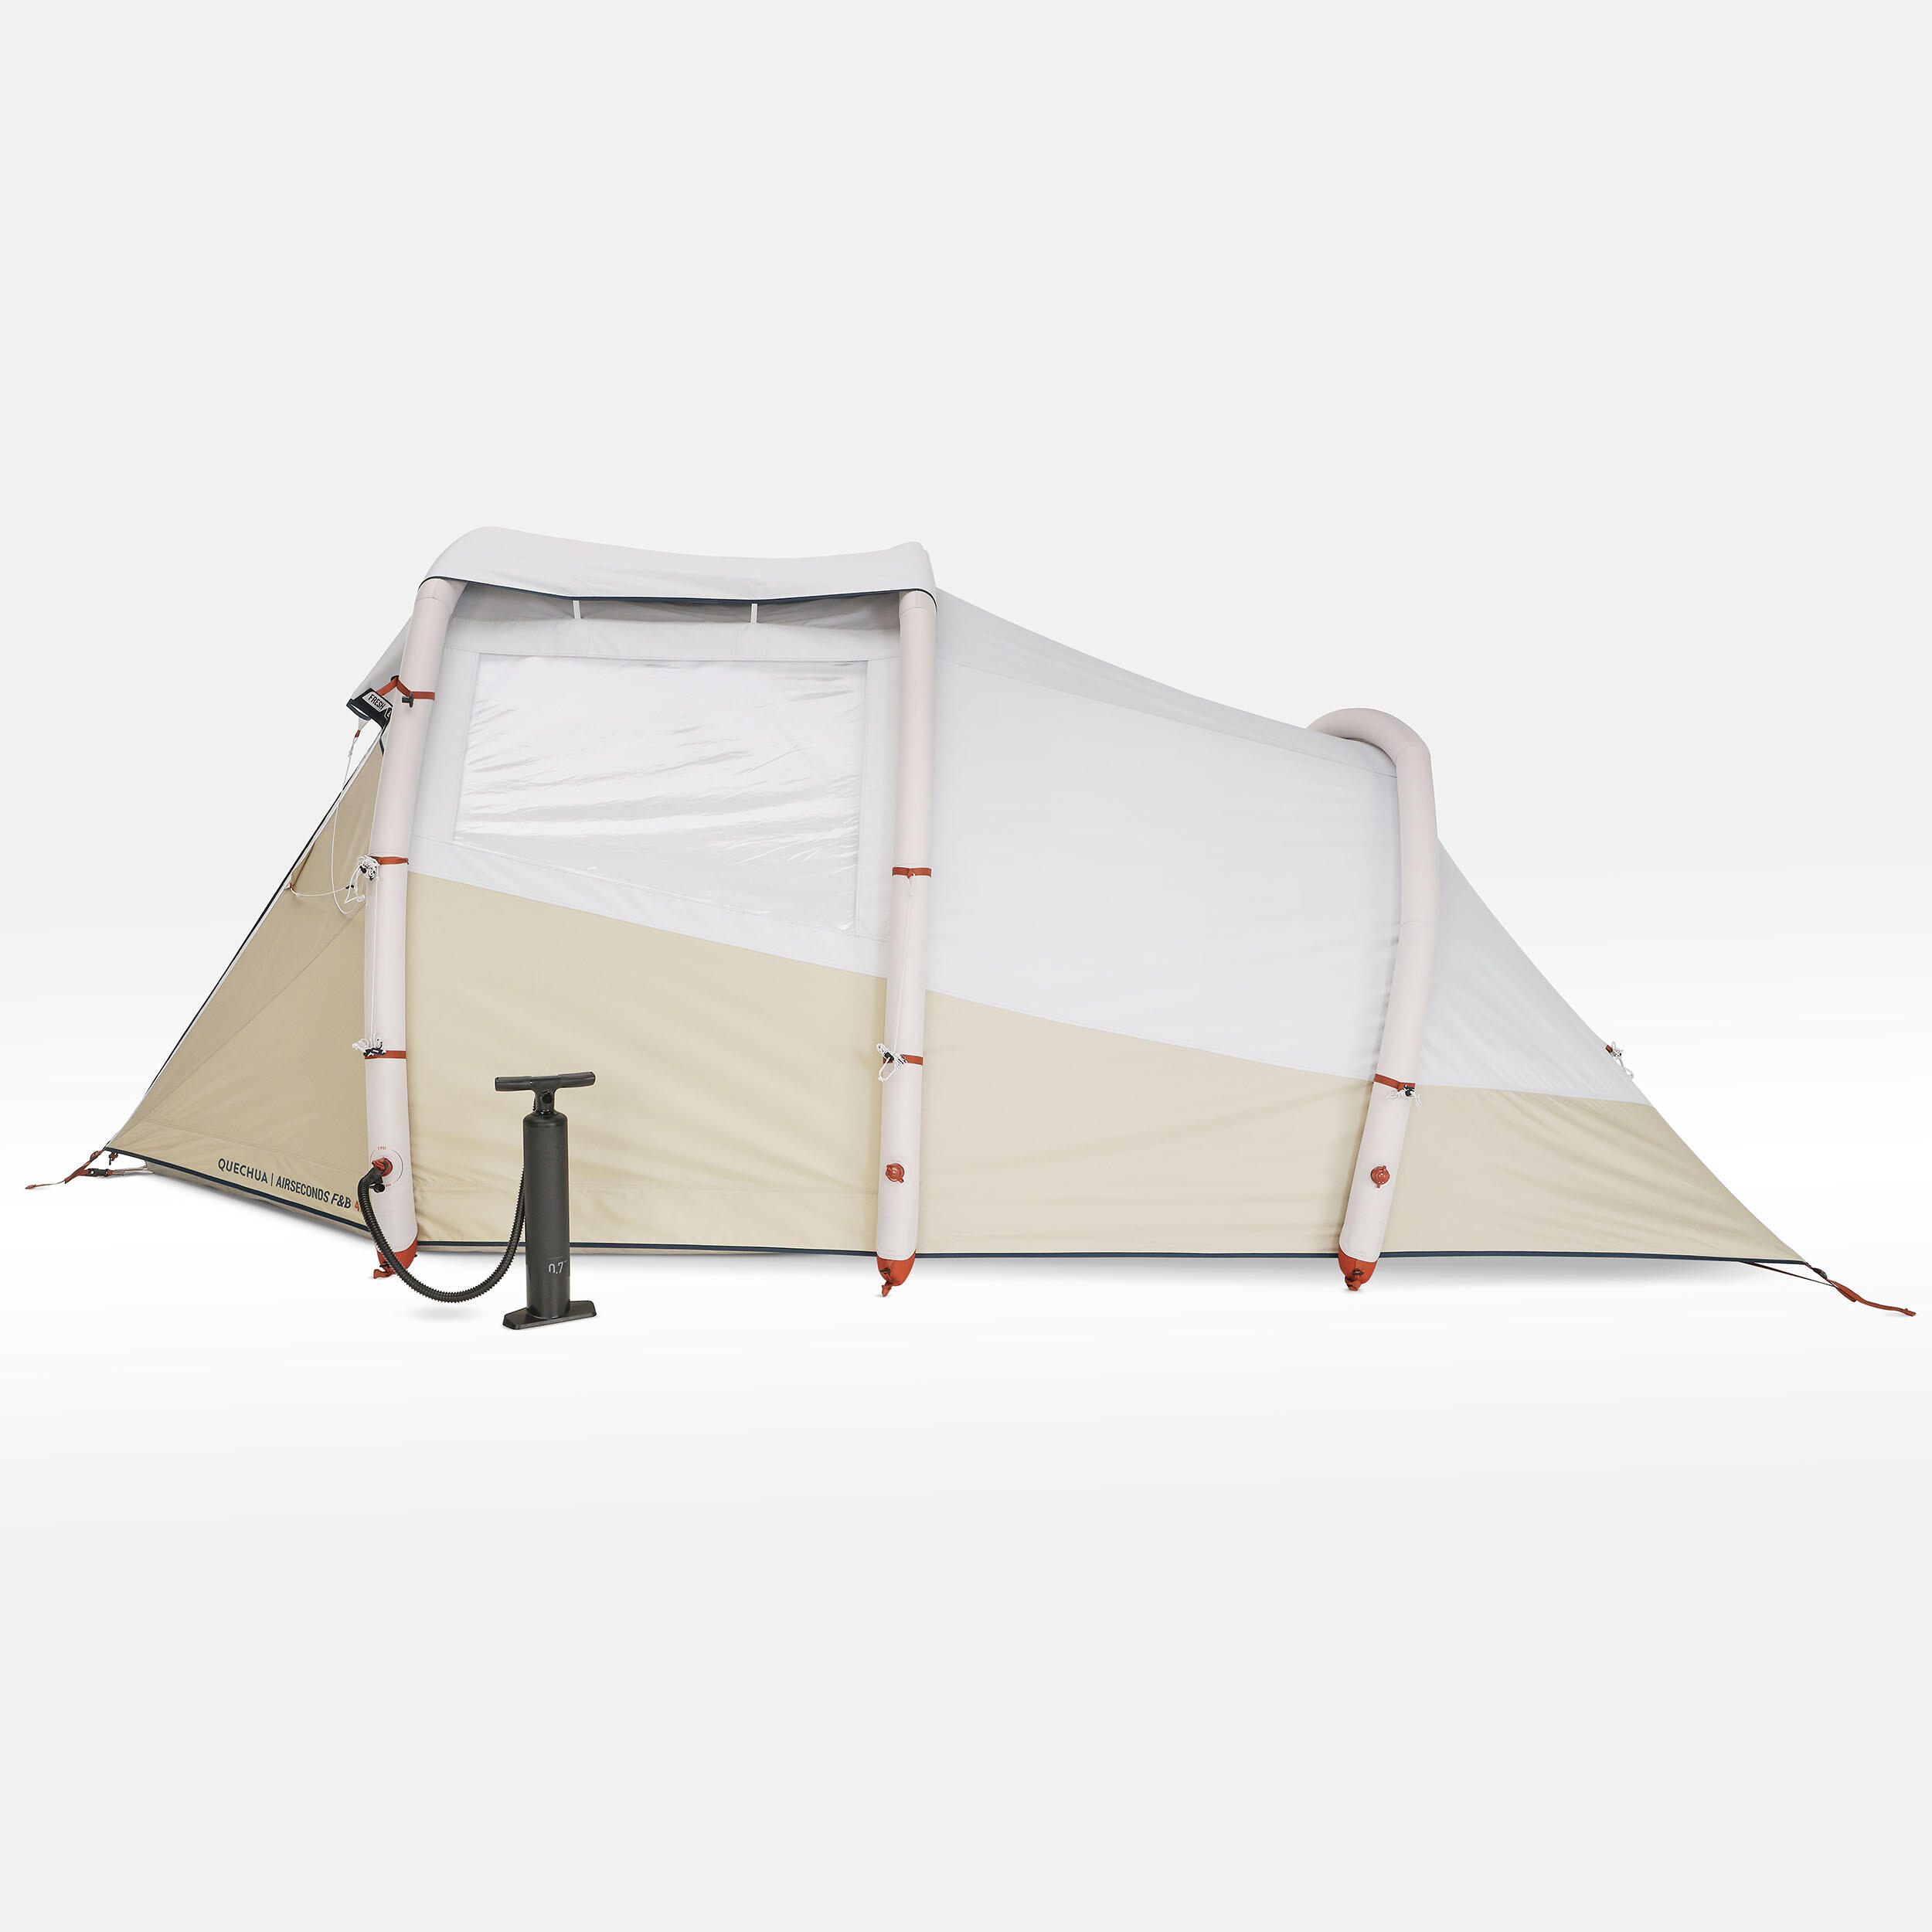 4 Man Inflatable Blackout Tent - Air Seconds 4.1 F&B 30/35